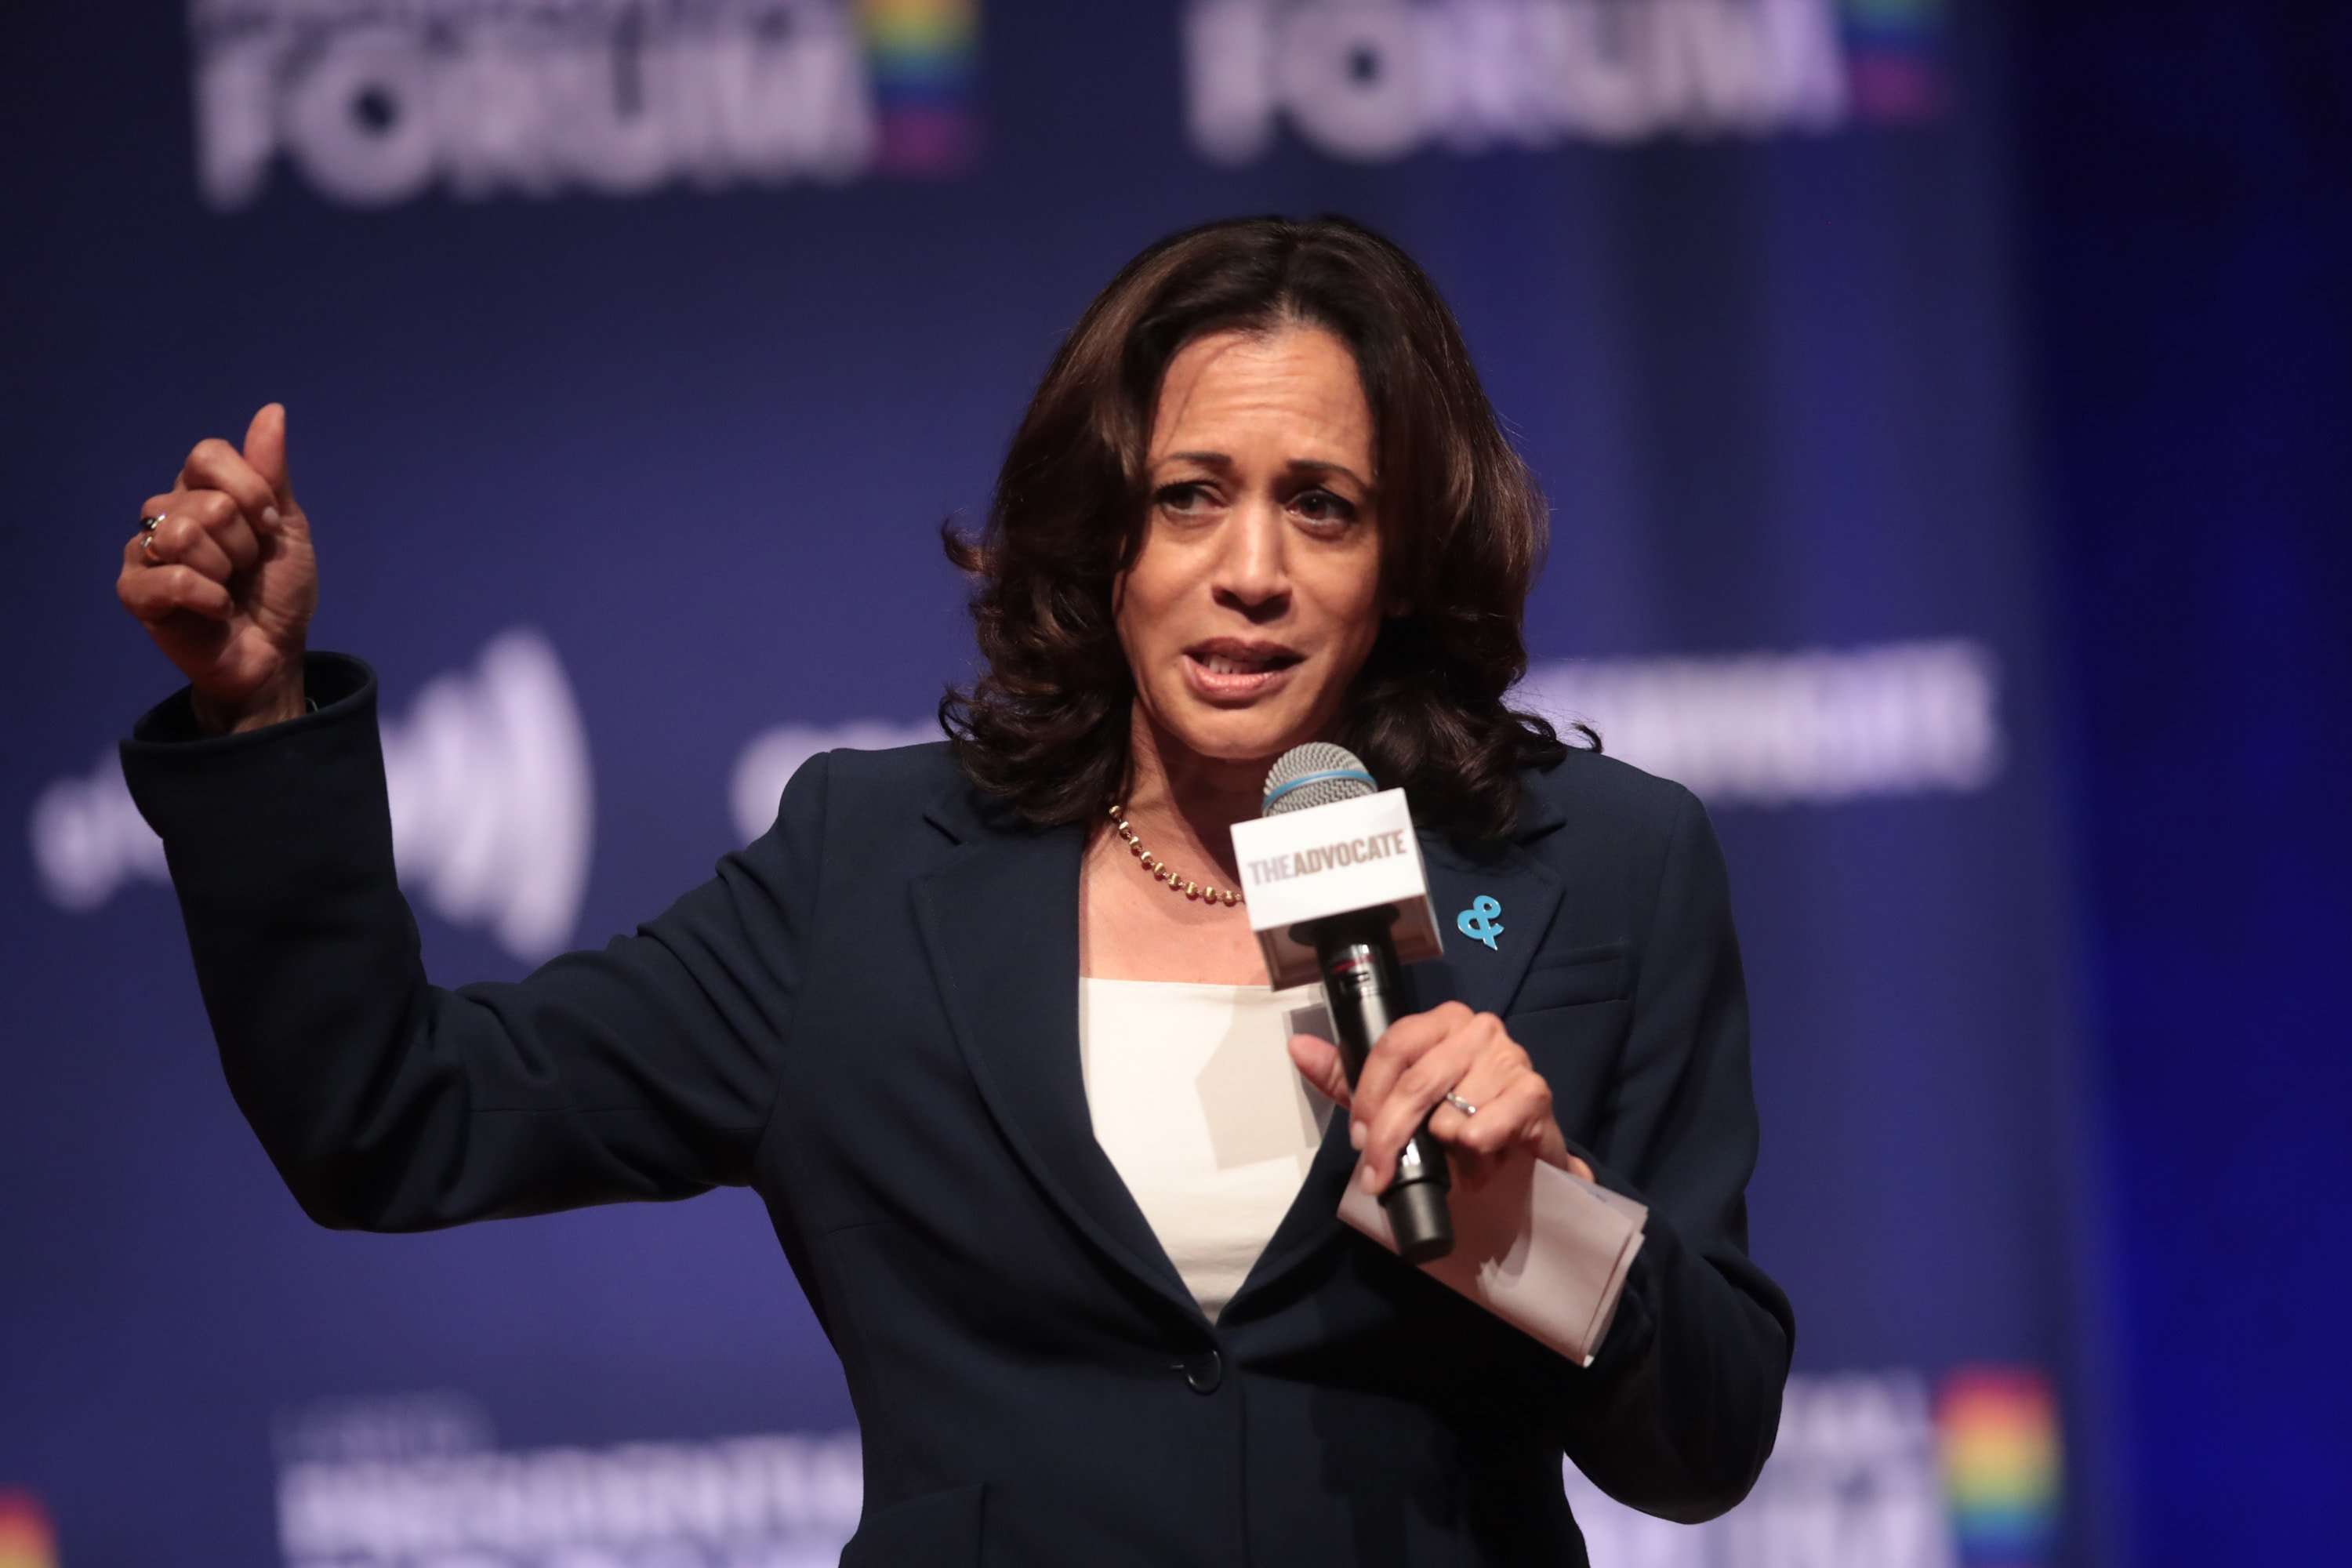 image for Kamala Harris drops out of presidential race after plummeting from top tier of Democratic candidates